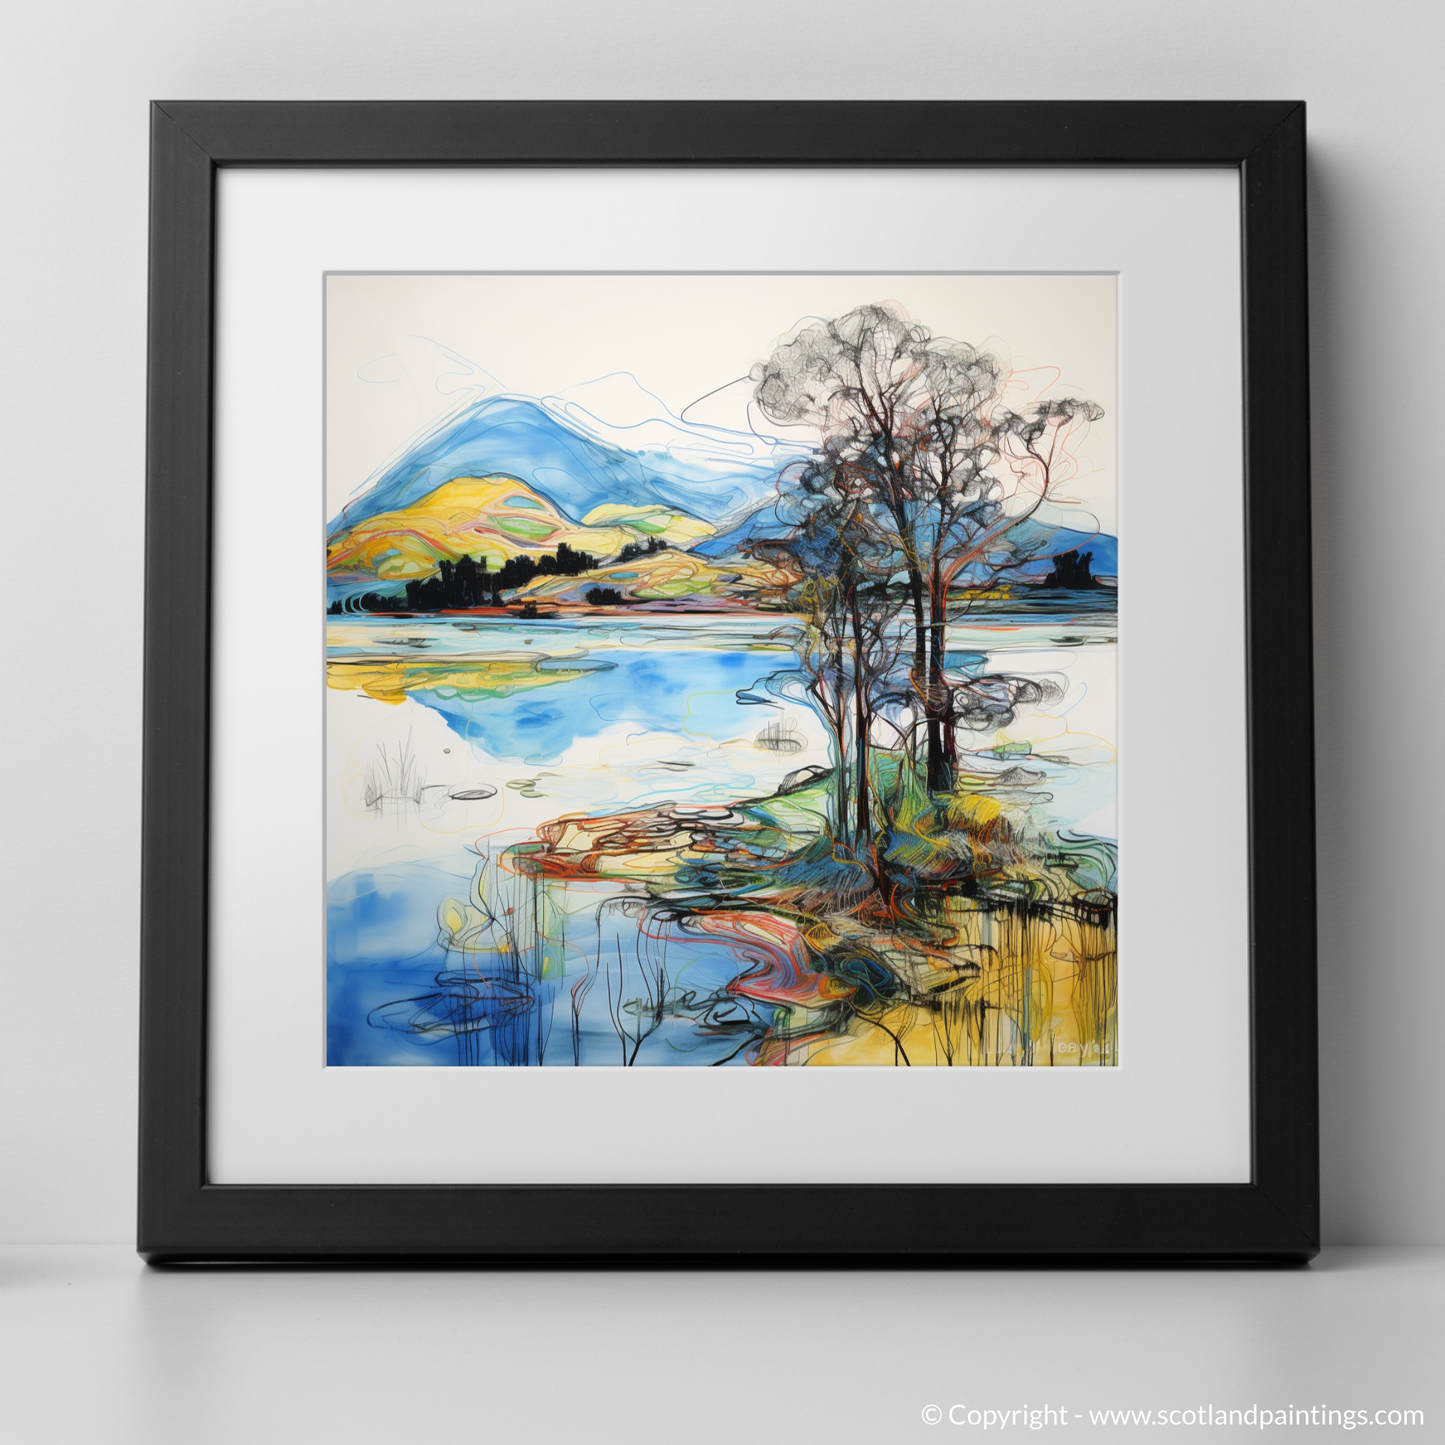 Art Print of Loch Awe with a black frame